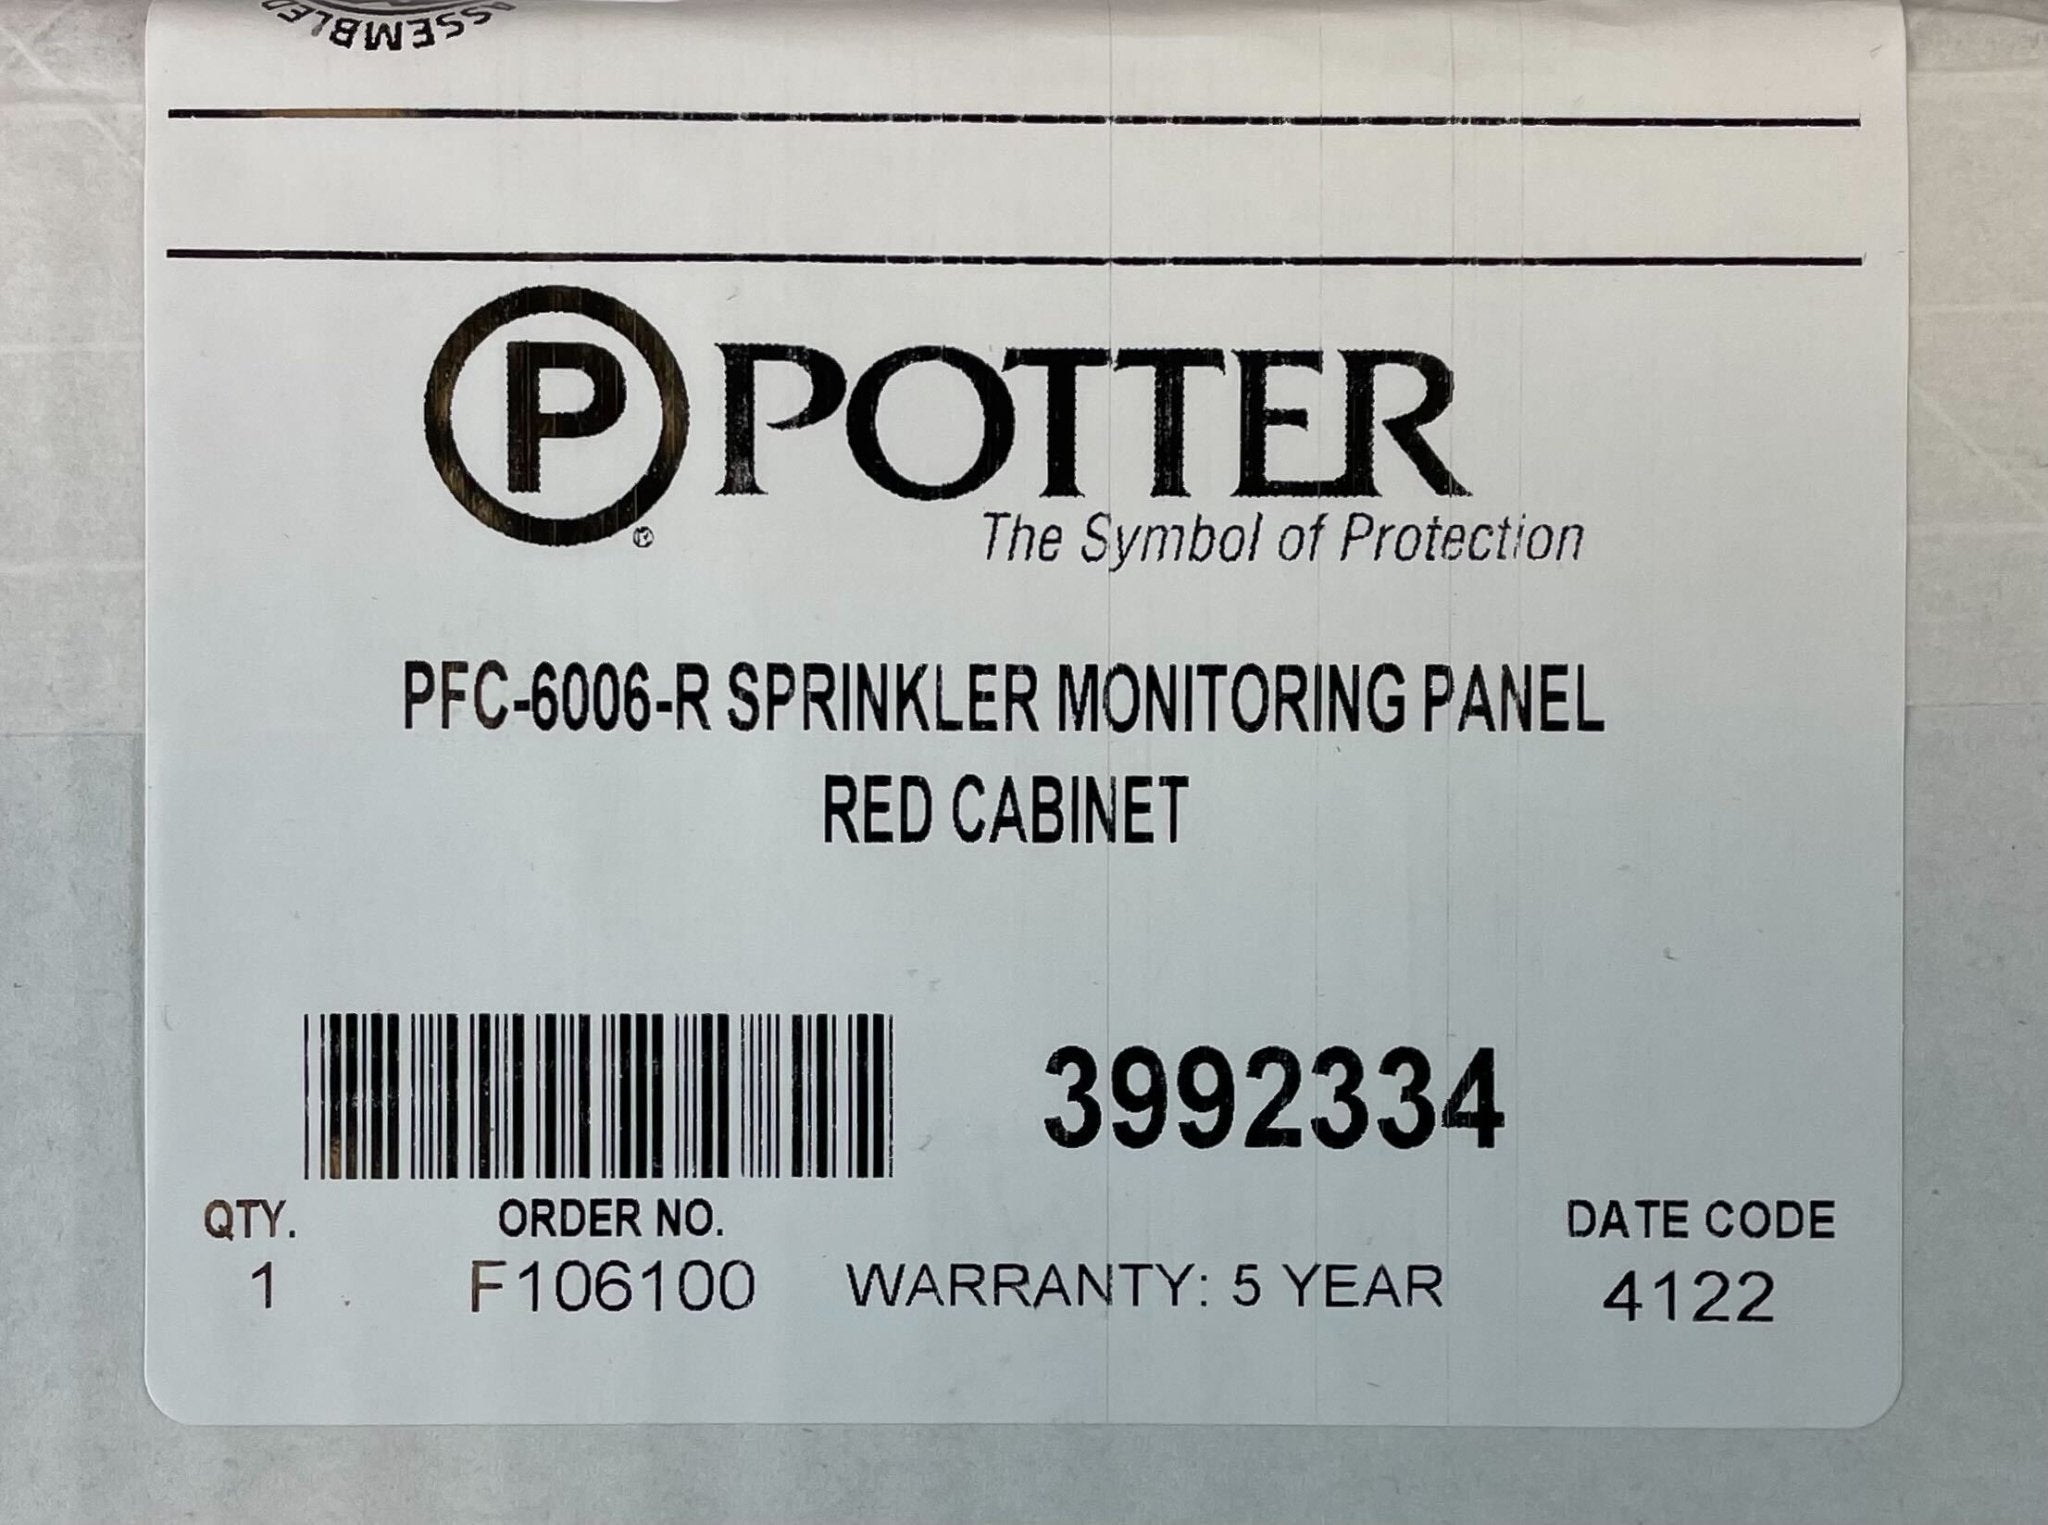 Potter PFC-6006-R - The Fire Alarm Supplier